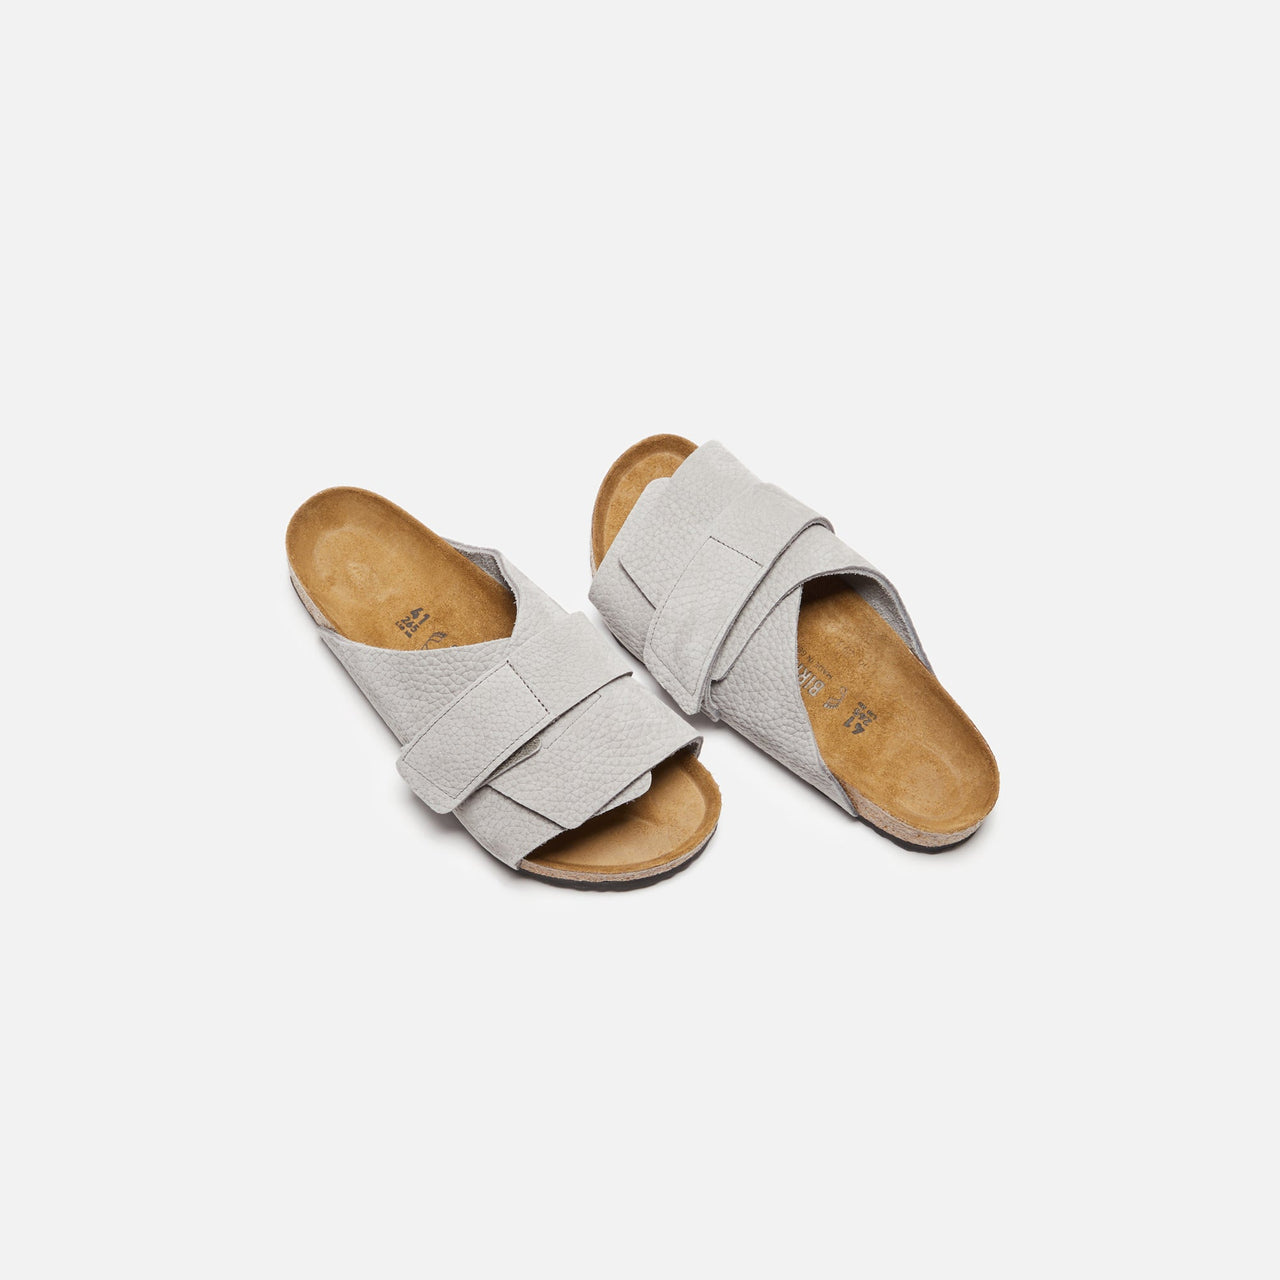 Pair of Birkenstock Kyoto Nubuck Whale Grey sandals in a stylish and modern design